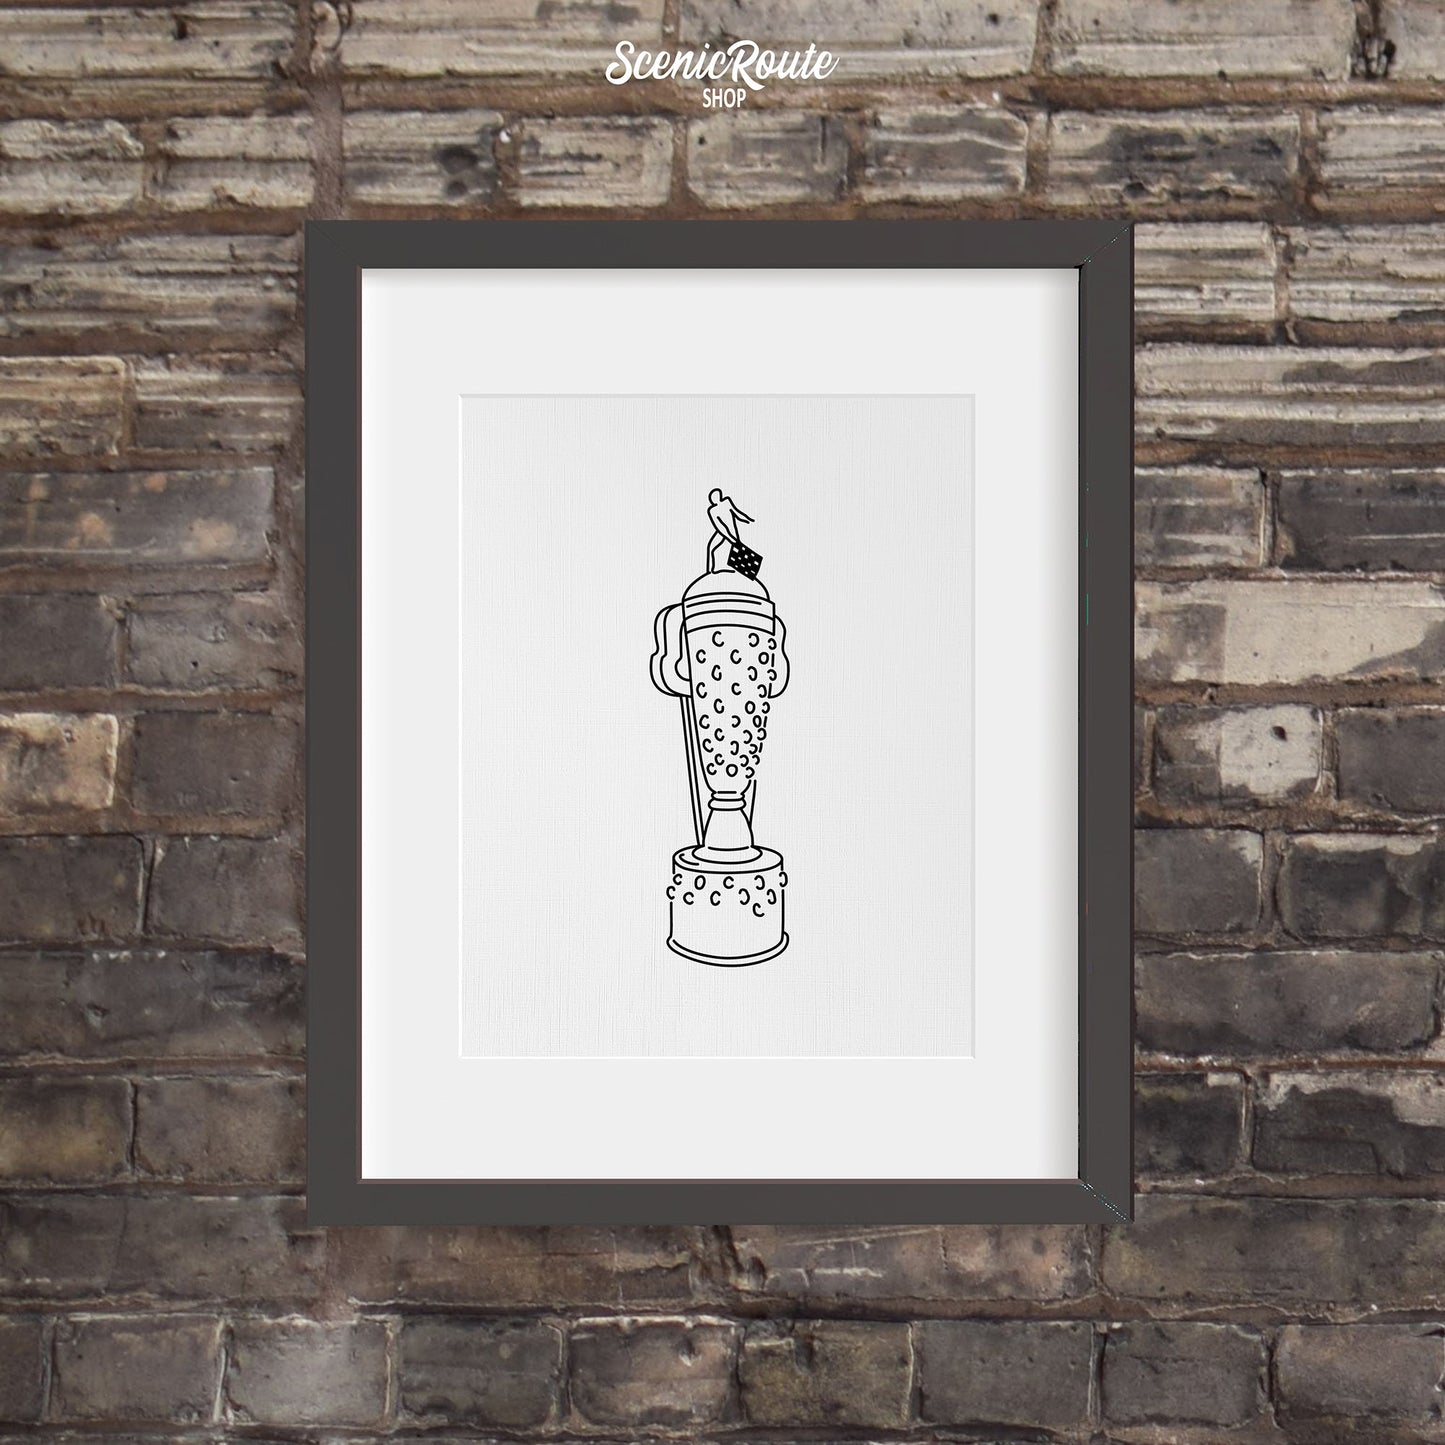 A framed line art drawing of the Indy Car Borg Warner Trophy on a brick wall